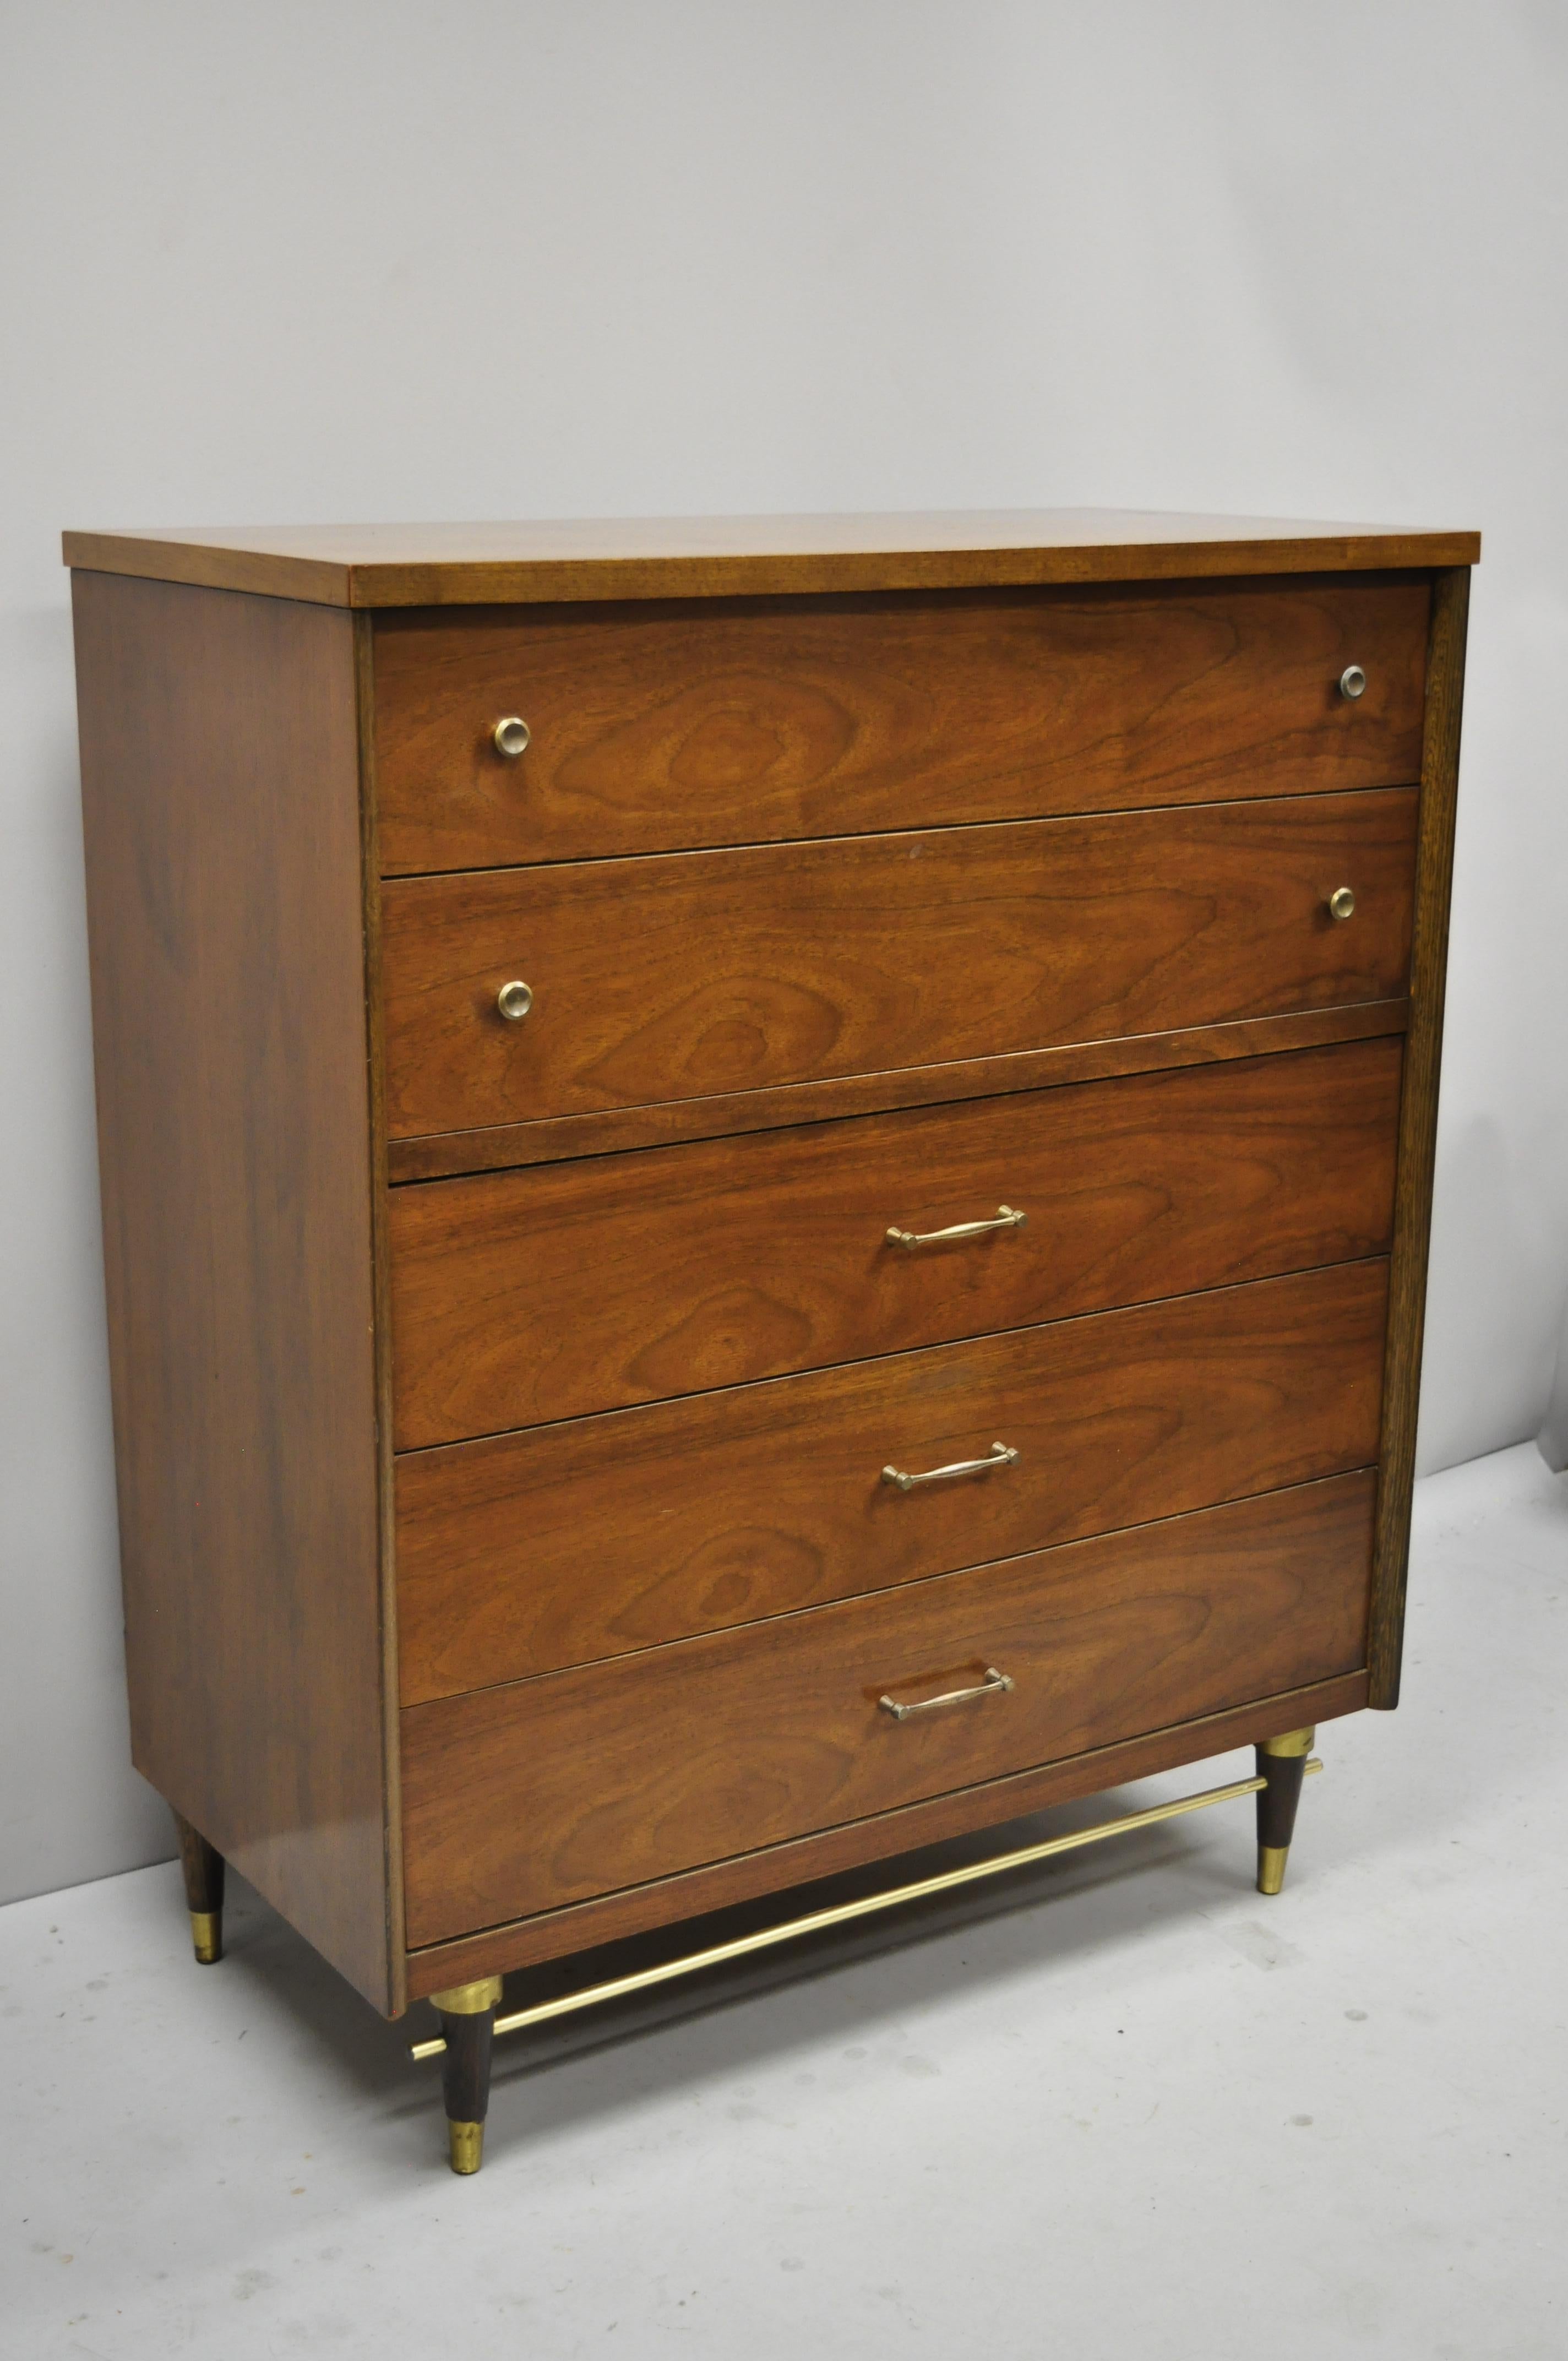 Vintage Mid-Century Modern walnut tall chest dresser by Bassett with brass stretcher base. Item features brass stretcher base, beautiful wood grain, 5 dovetailed drawers, tapered legs, clean modernist lines, great style and form, circa mid-20th